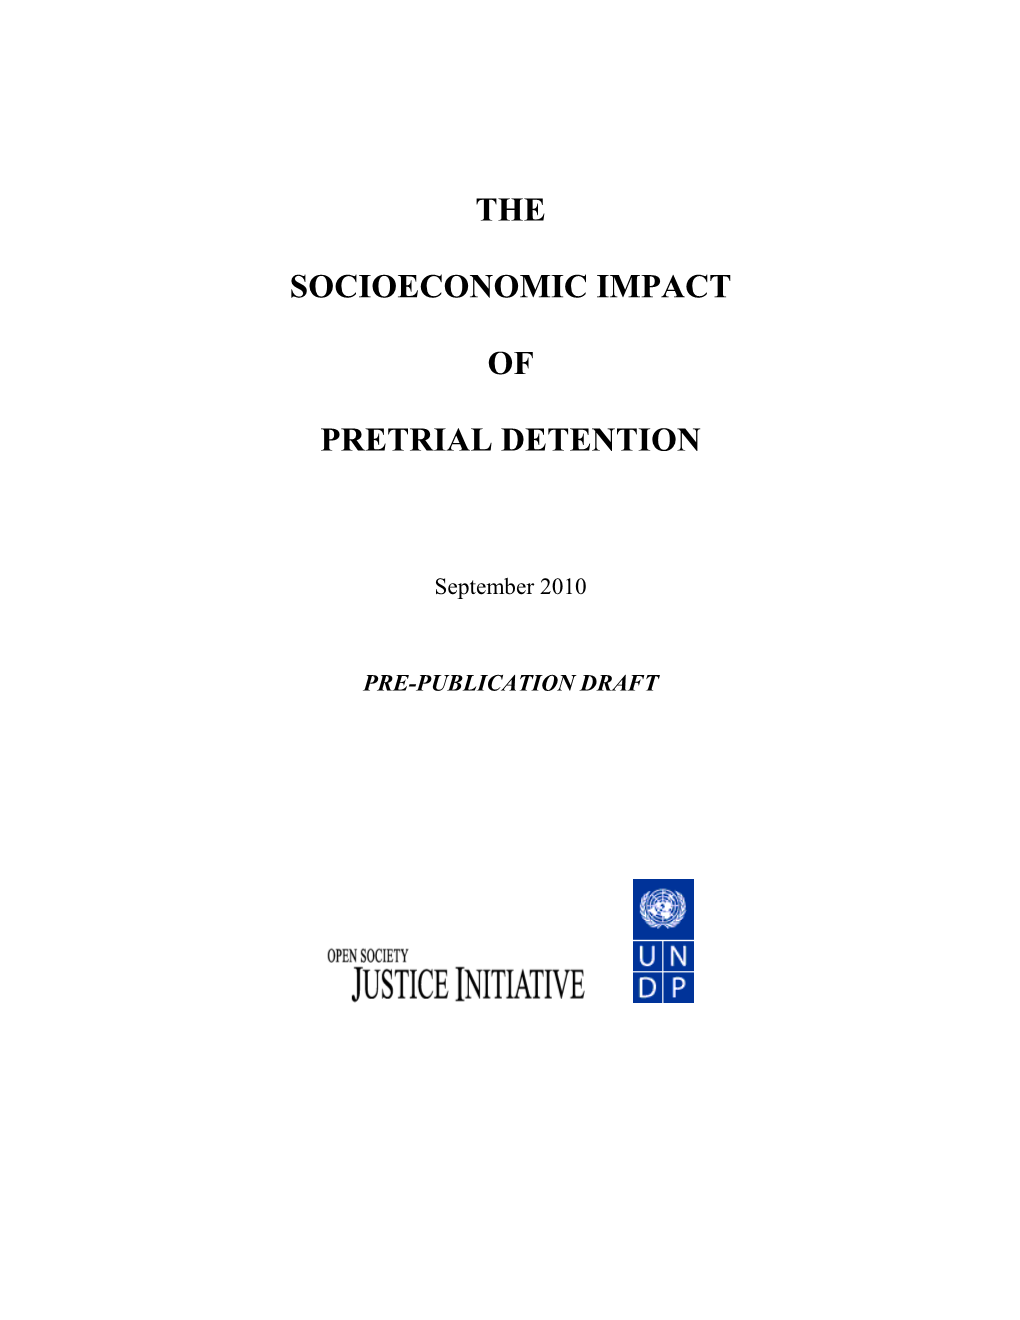 The Socioeconomic Impact of Pretrial Detention, the Papers in the Series Look at the Intersection of Pretrial Detention and Public Health, Torture, and Corruption